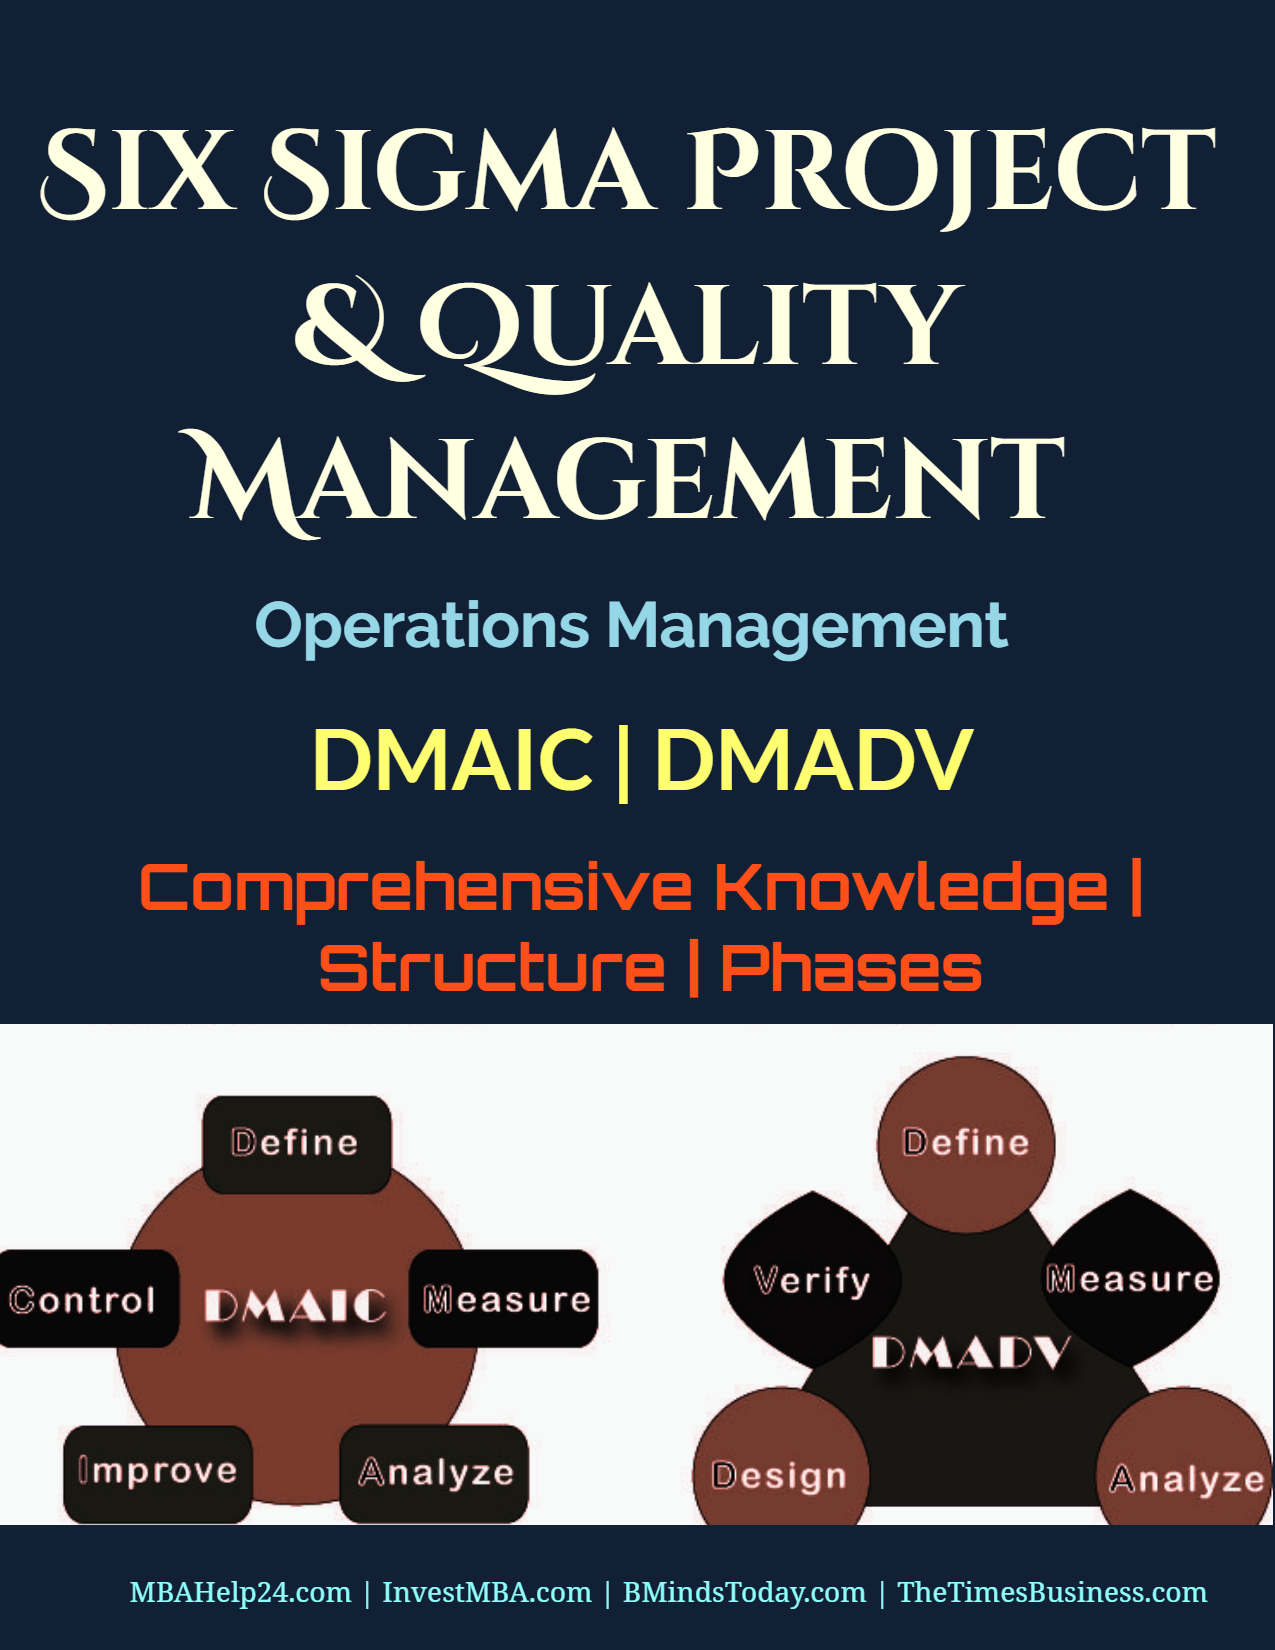 Six Sigma Project and Quality Management | DMAIC | DMADV | Structure | Phases six sigma Six Sigma Project and Quality Management | DMAIC | DMADV | DFSS | Phases Six Sigma Project and Quality Management DMAIC DMADV Structure Phases